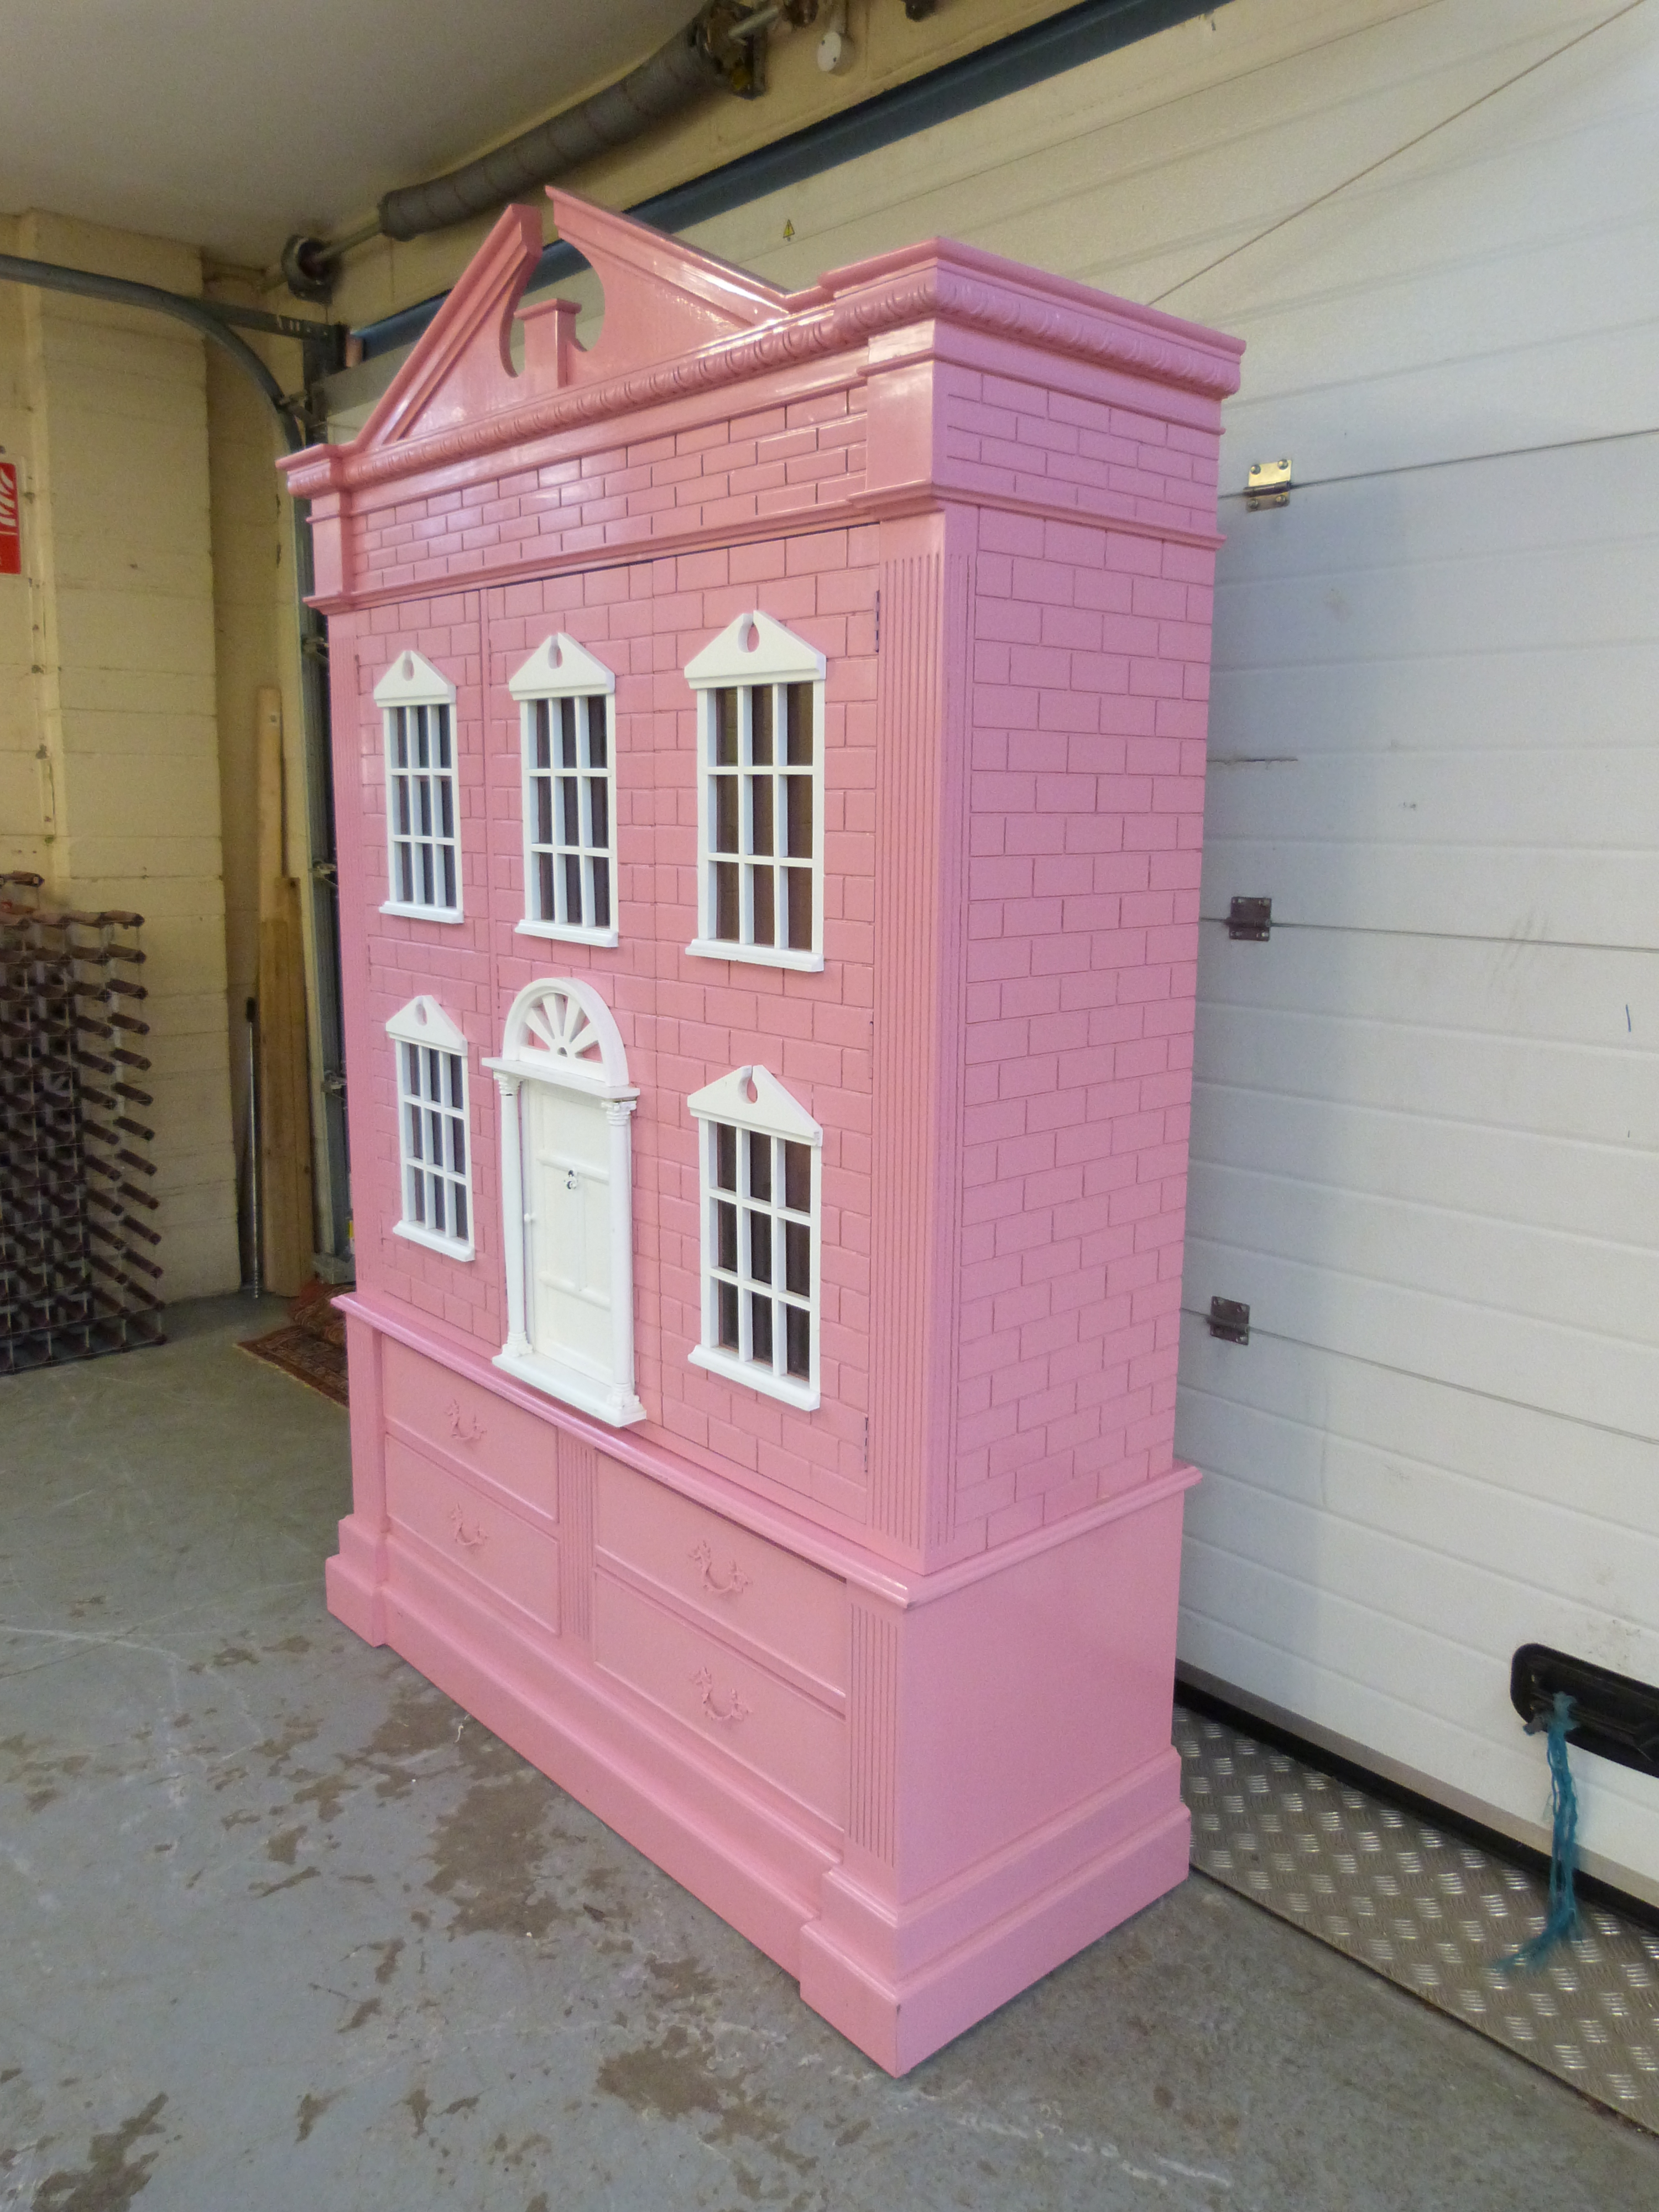 A pink painted child's wardrobe in the form of a doll's house, - Image 2 of 2